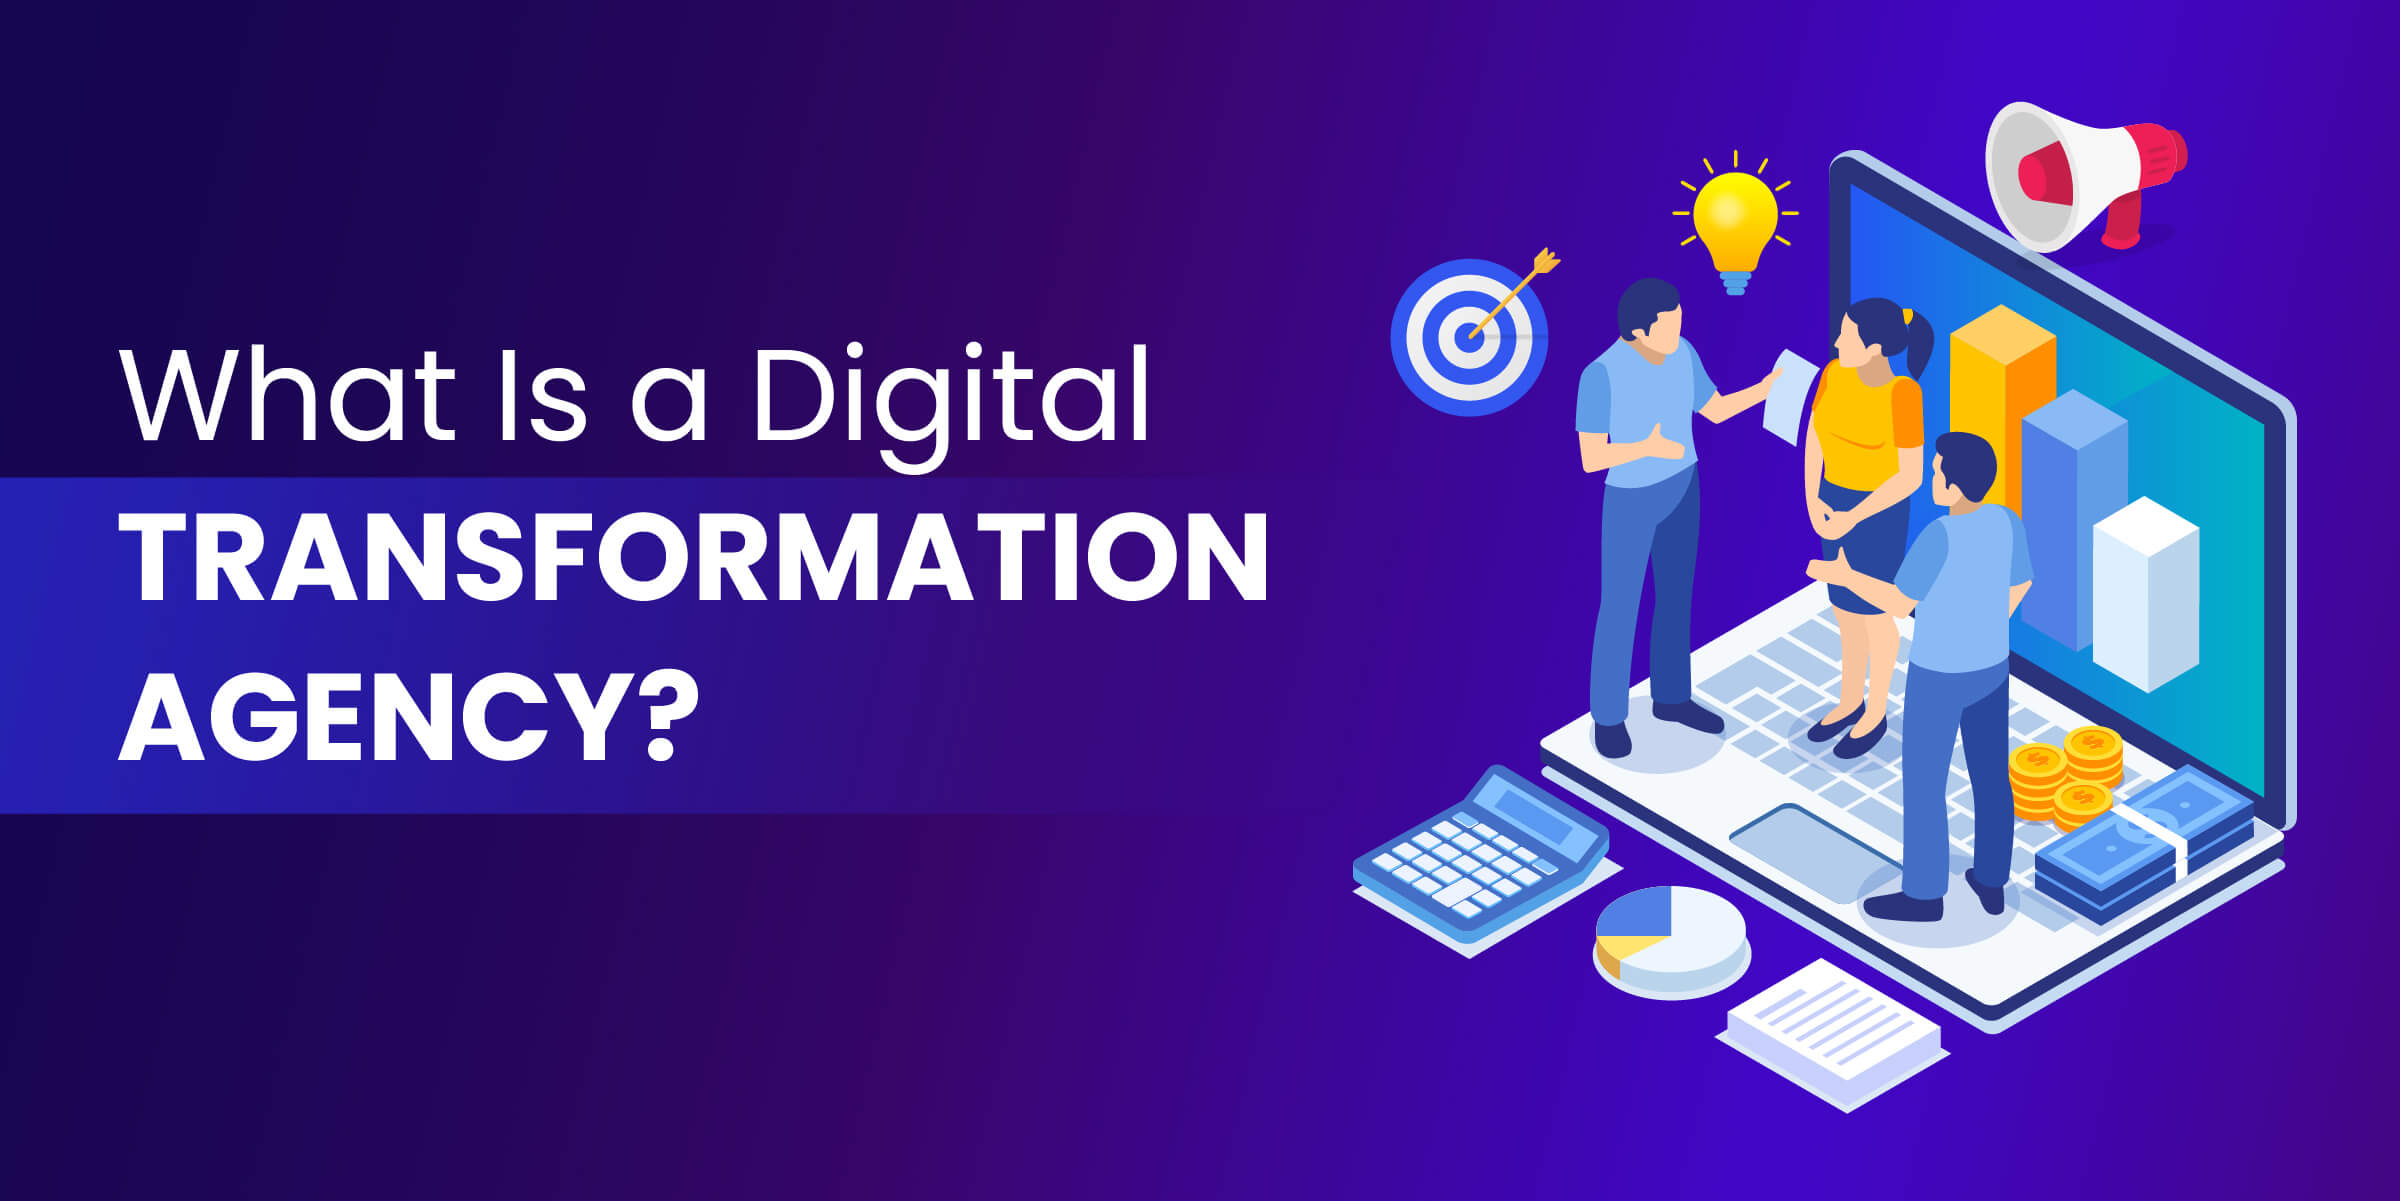 What Is a Digital Transformation Agency